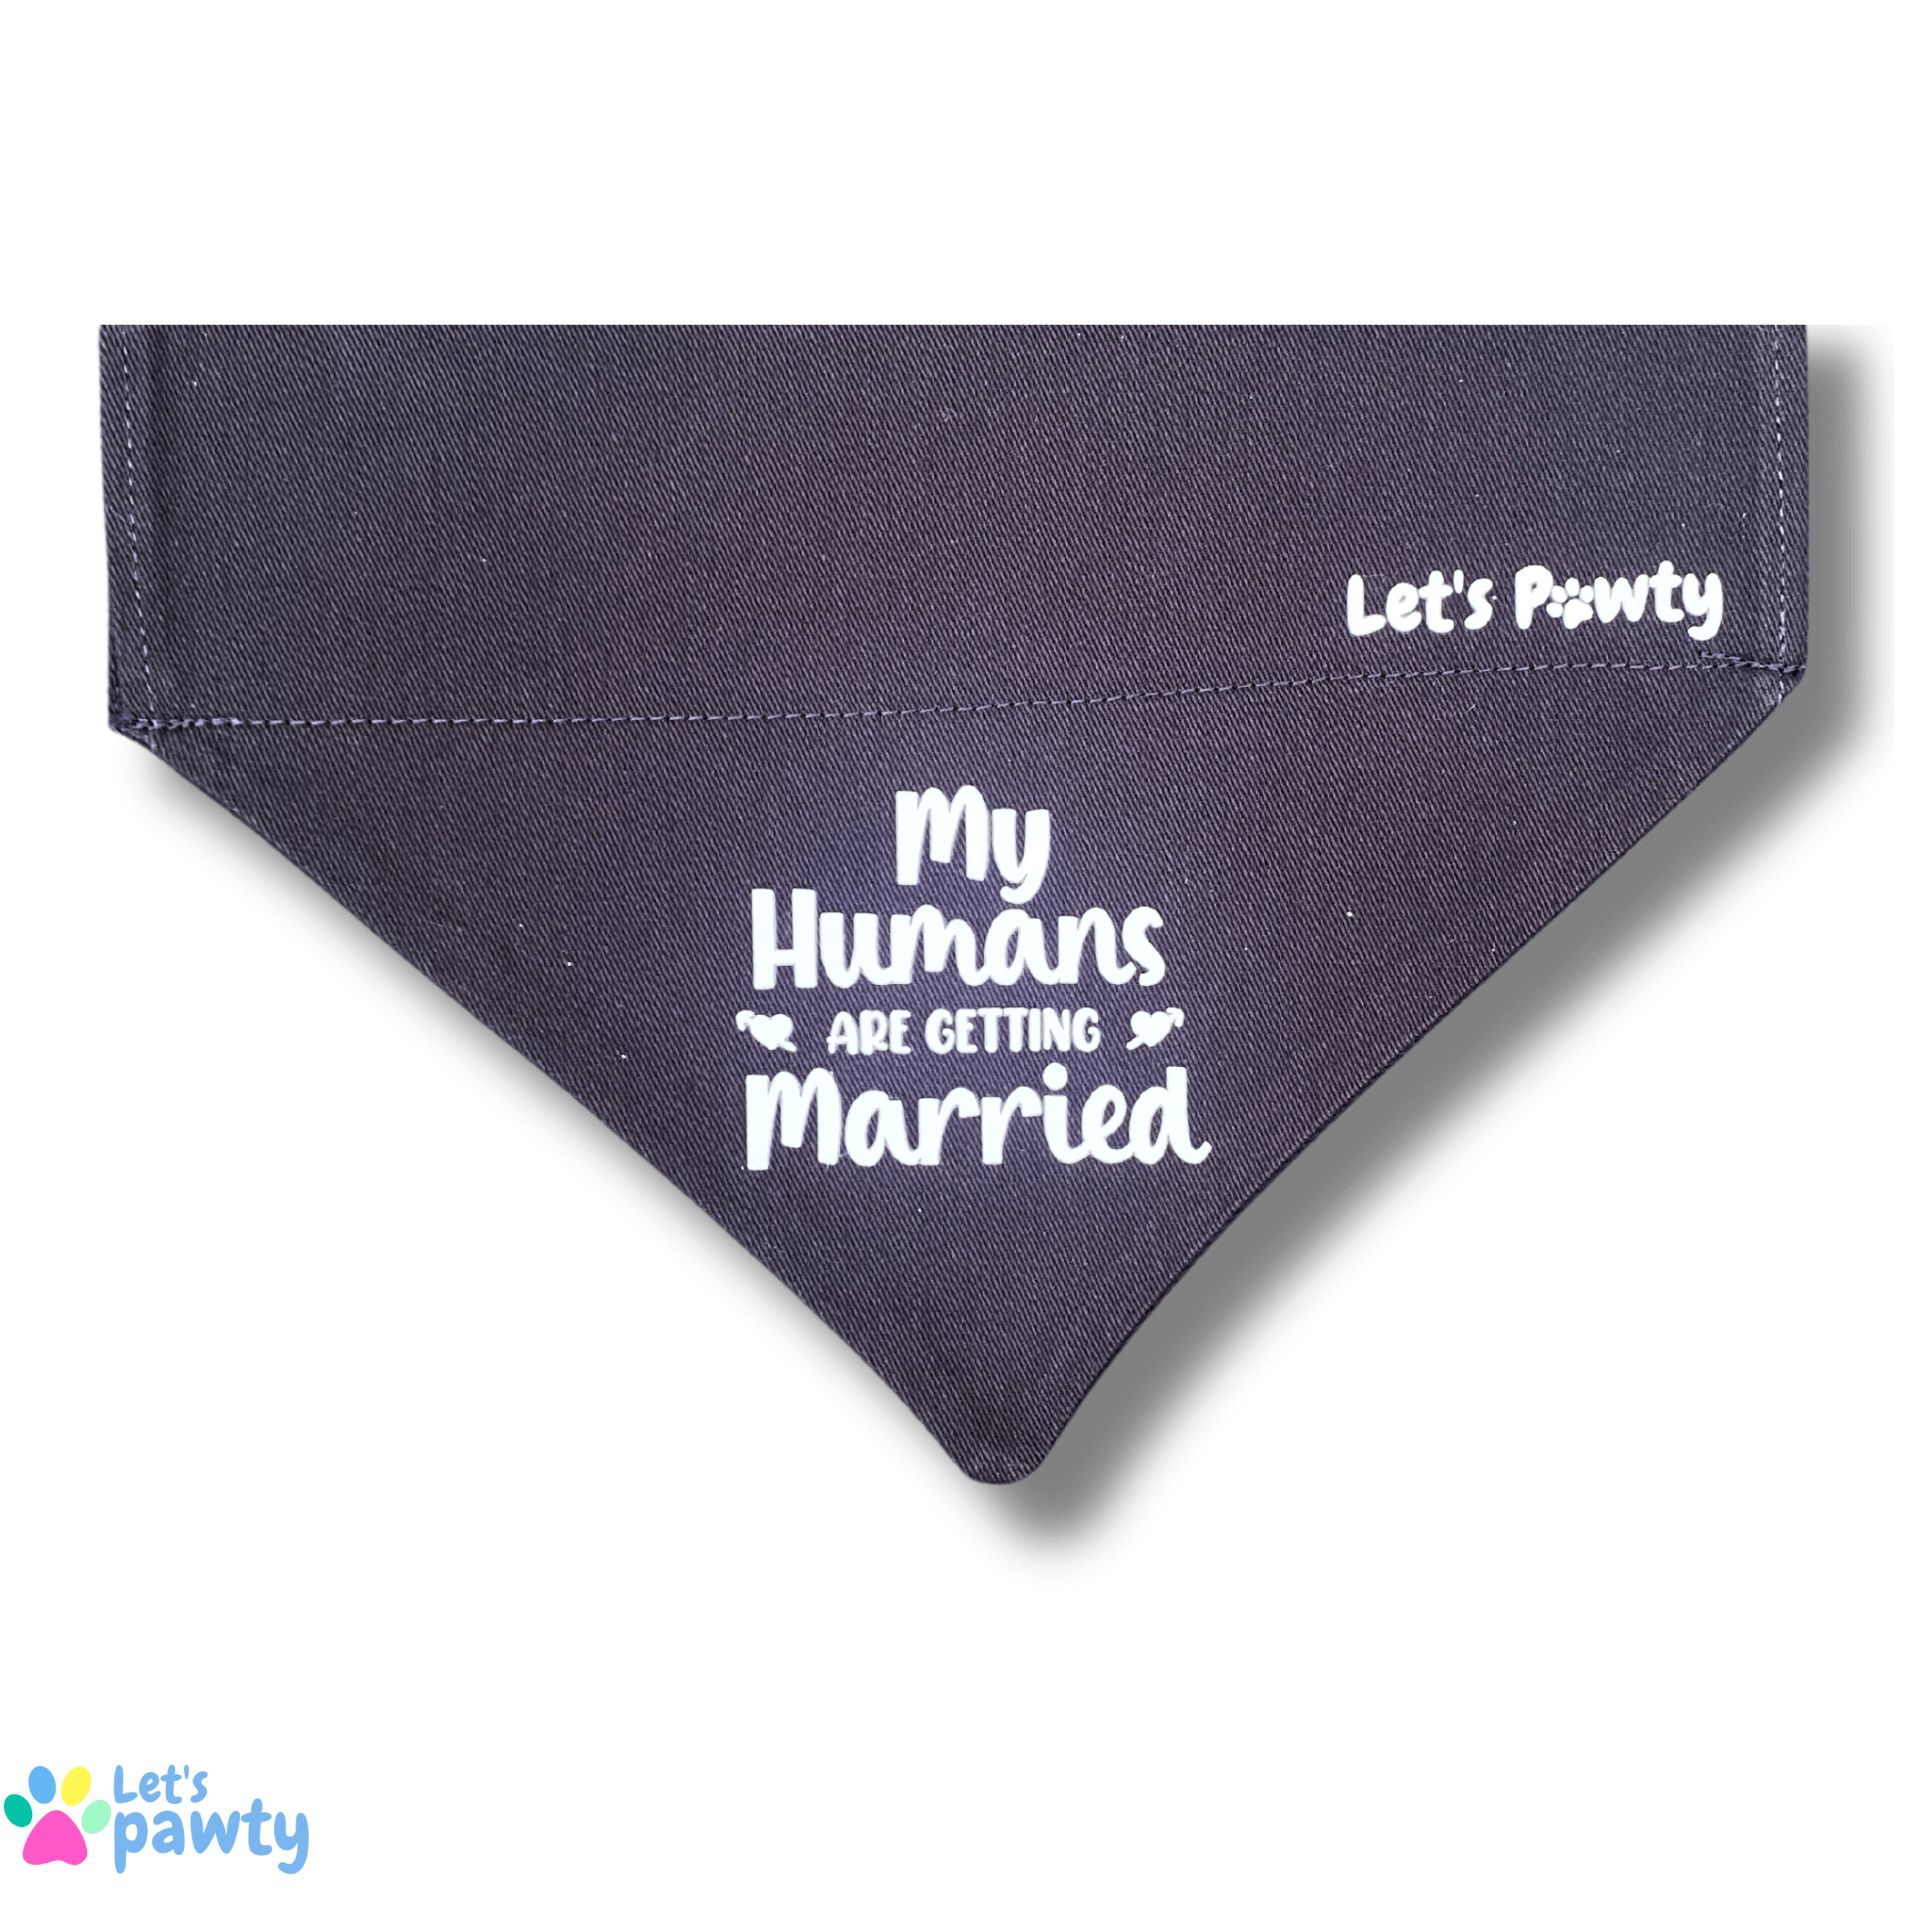 My Humans are Getting Married reversible dog bandana let's pawty 